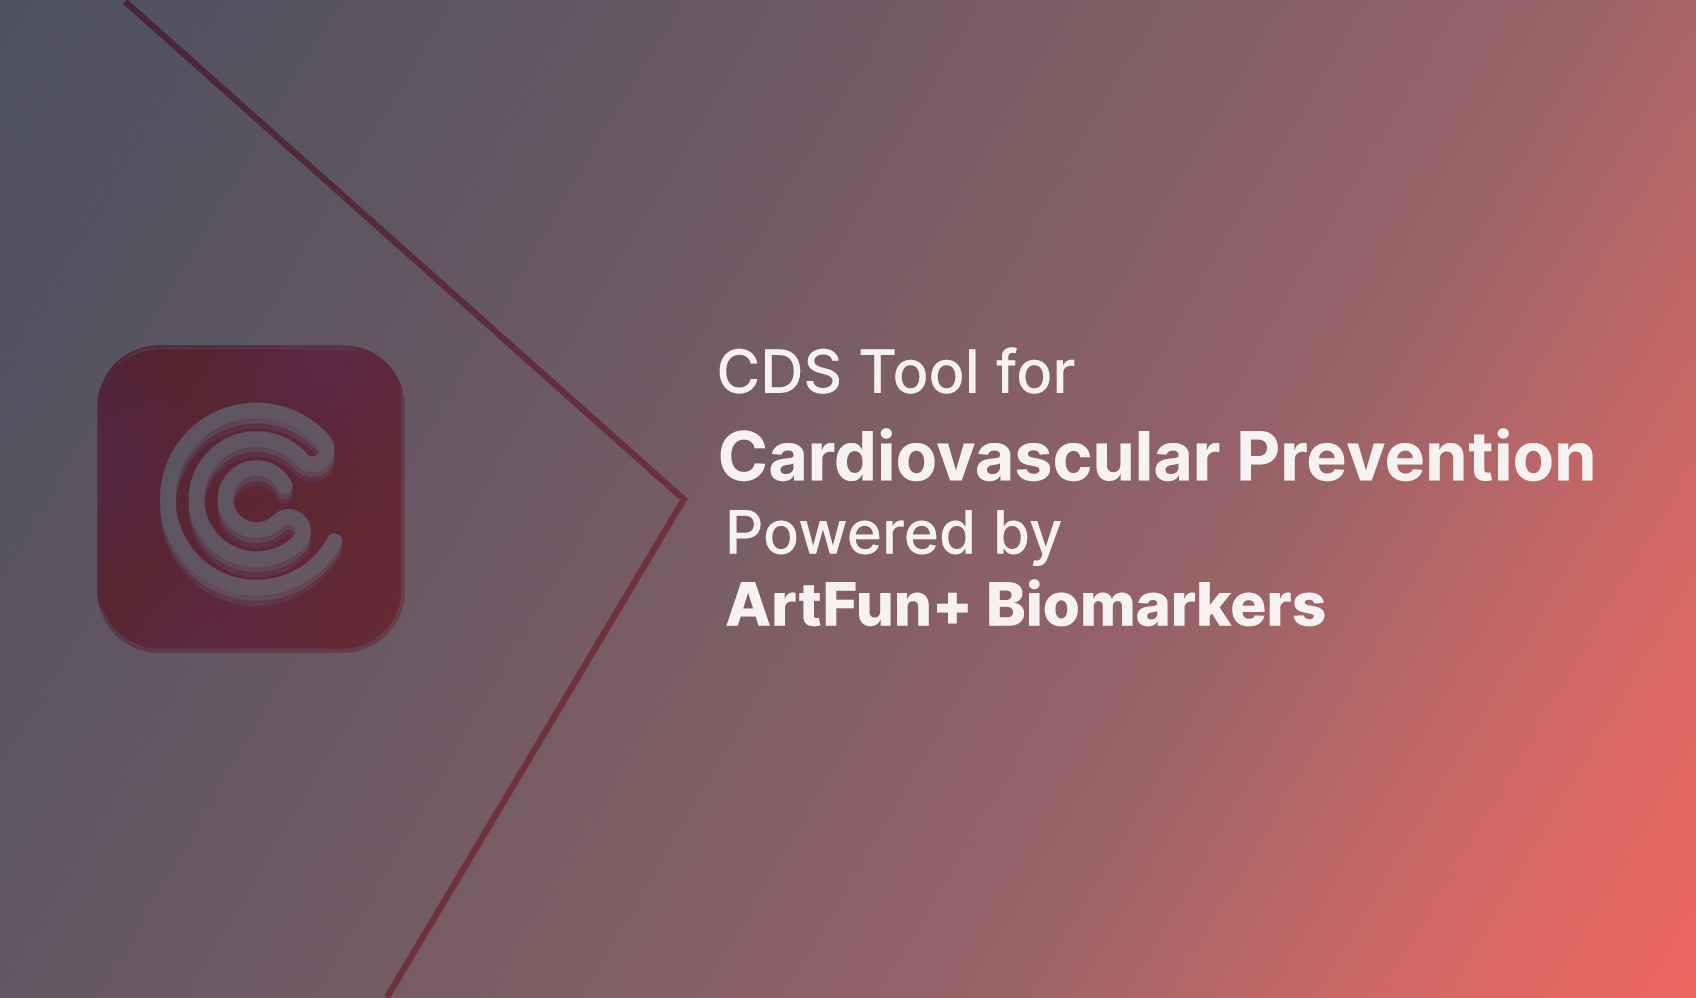 CDS Tool for Cardiovascular Prevention Powered by Artfun+ Biomarkers